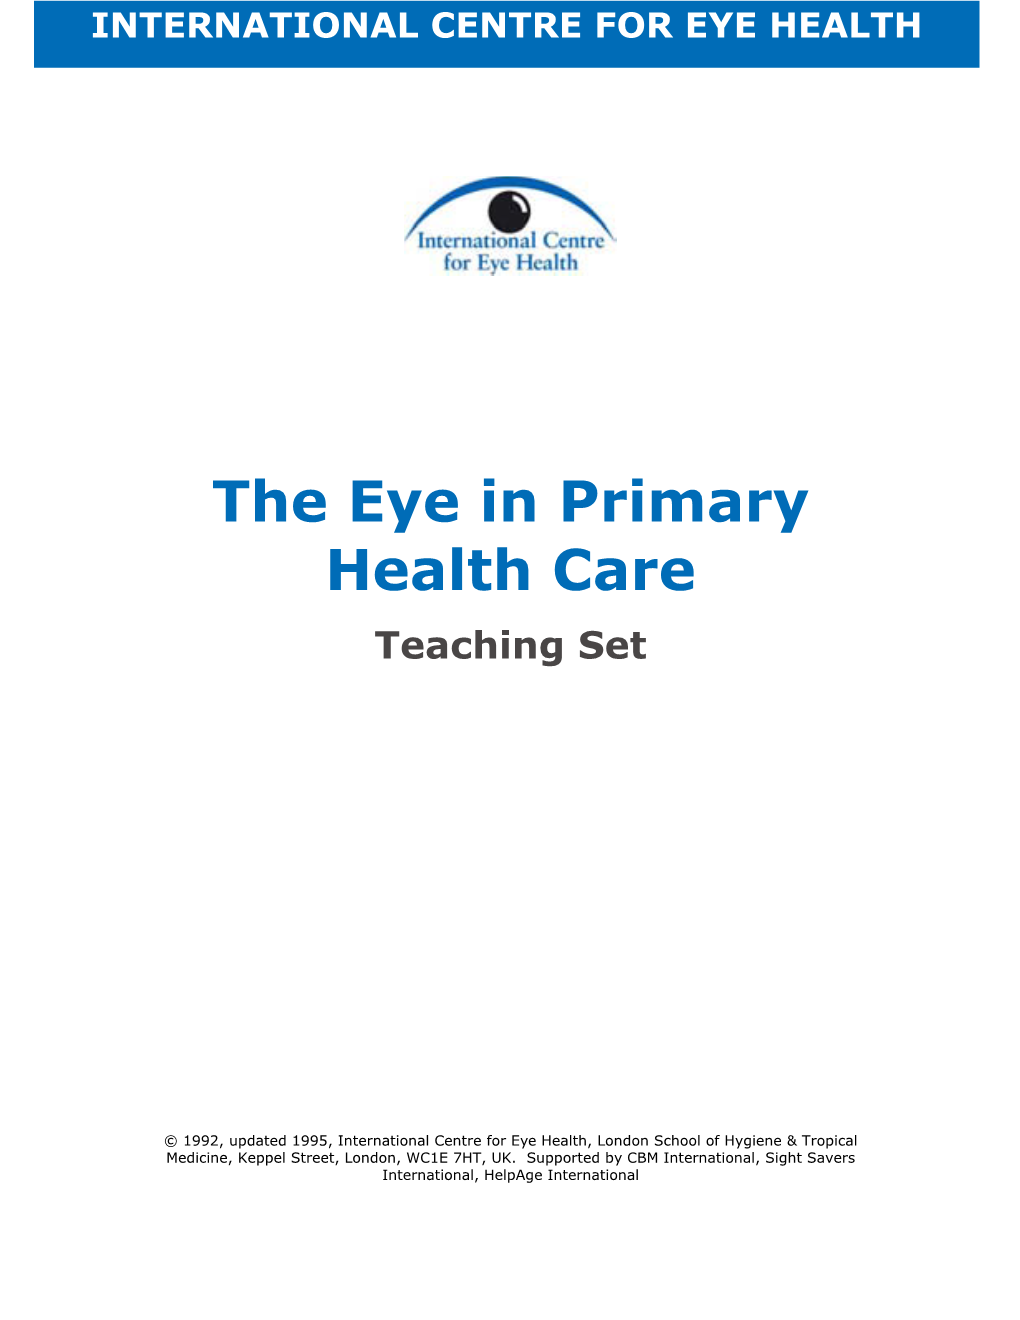 The Eye in Primary Health Care Teaching Set